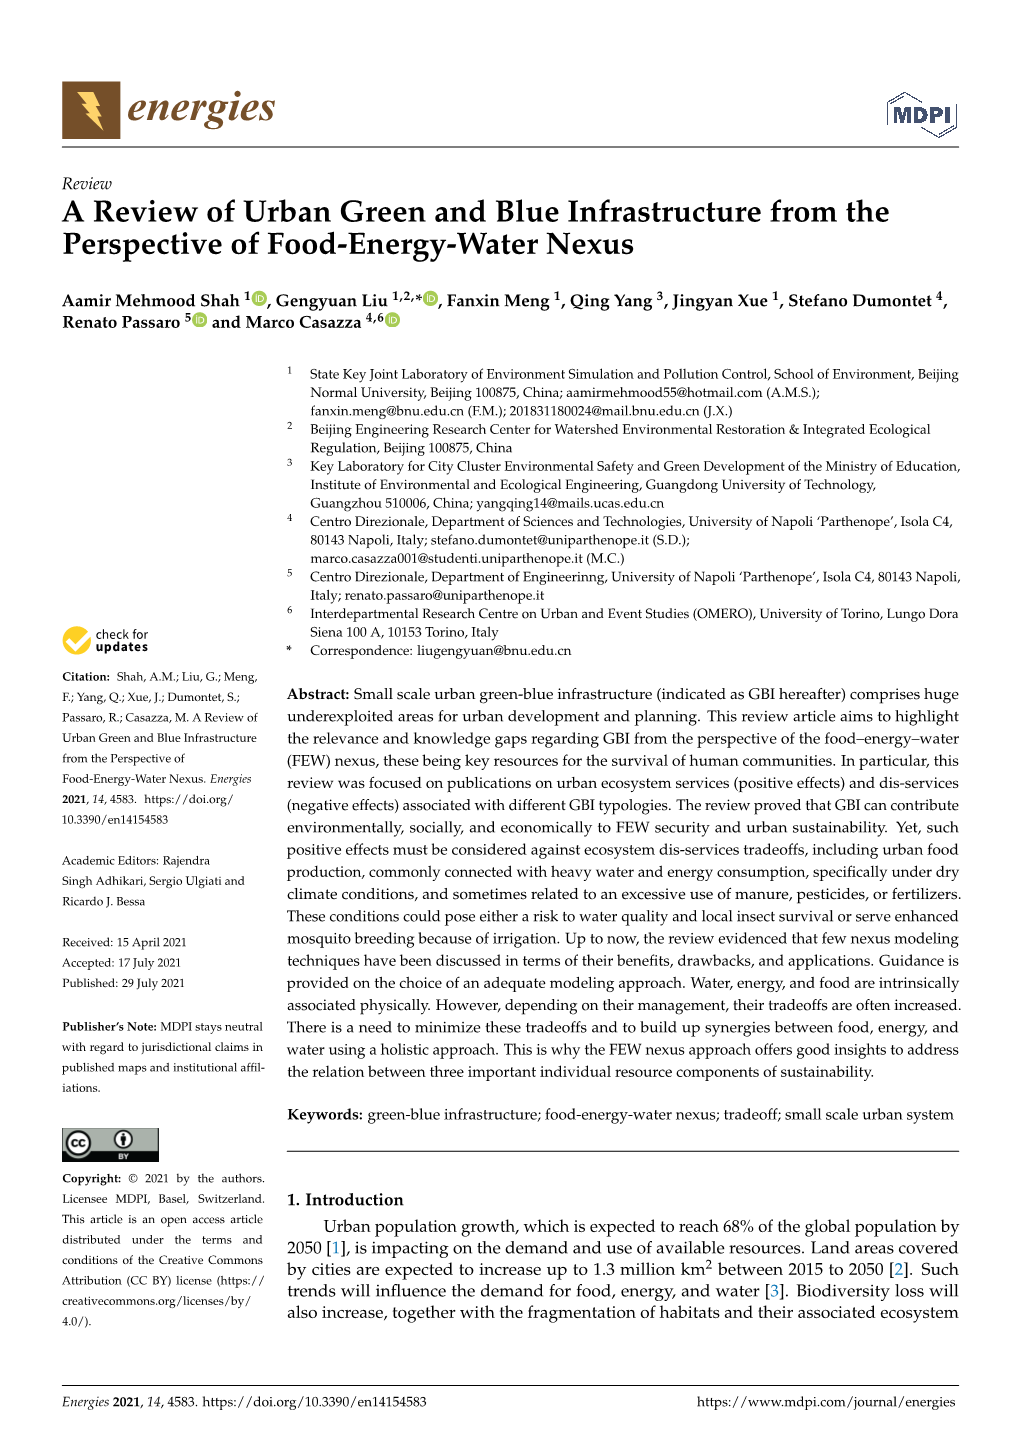 A Review of Urban Green and Blue Infrastructure from the Perspective of Food-Energy-Water Nexus